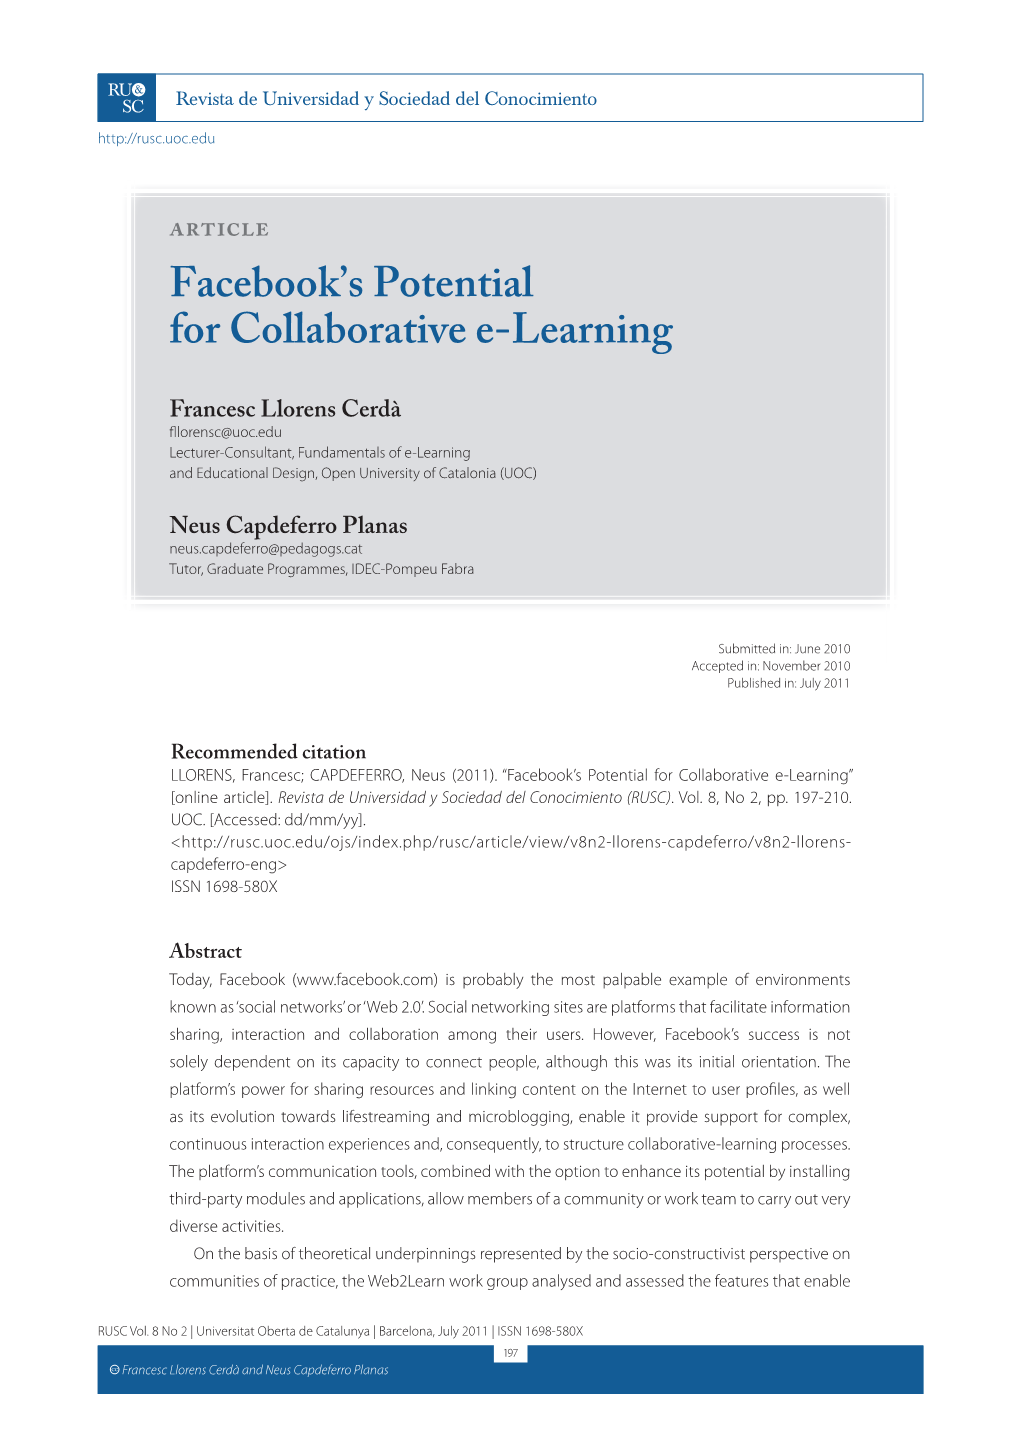 Facebook's Potential for Collaborative E-Learning